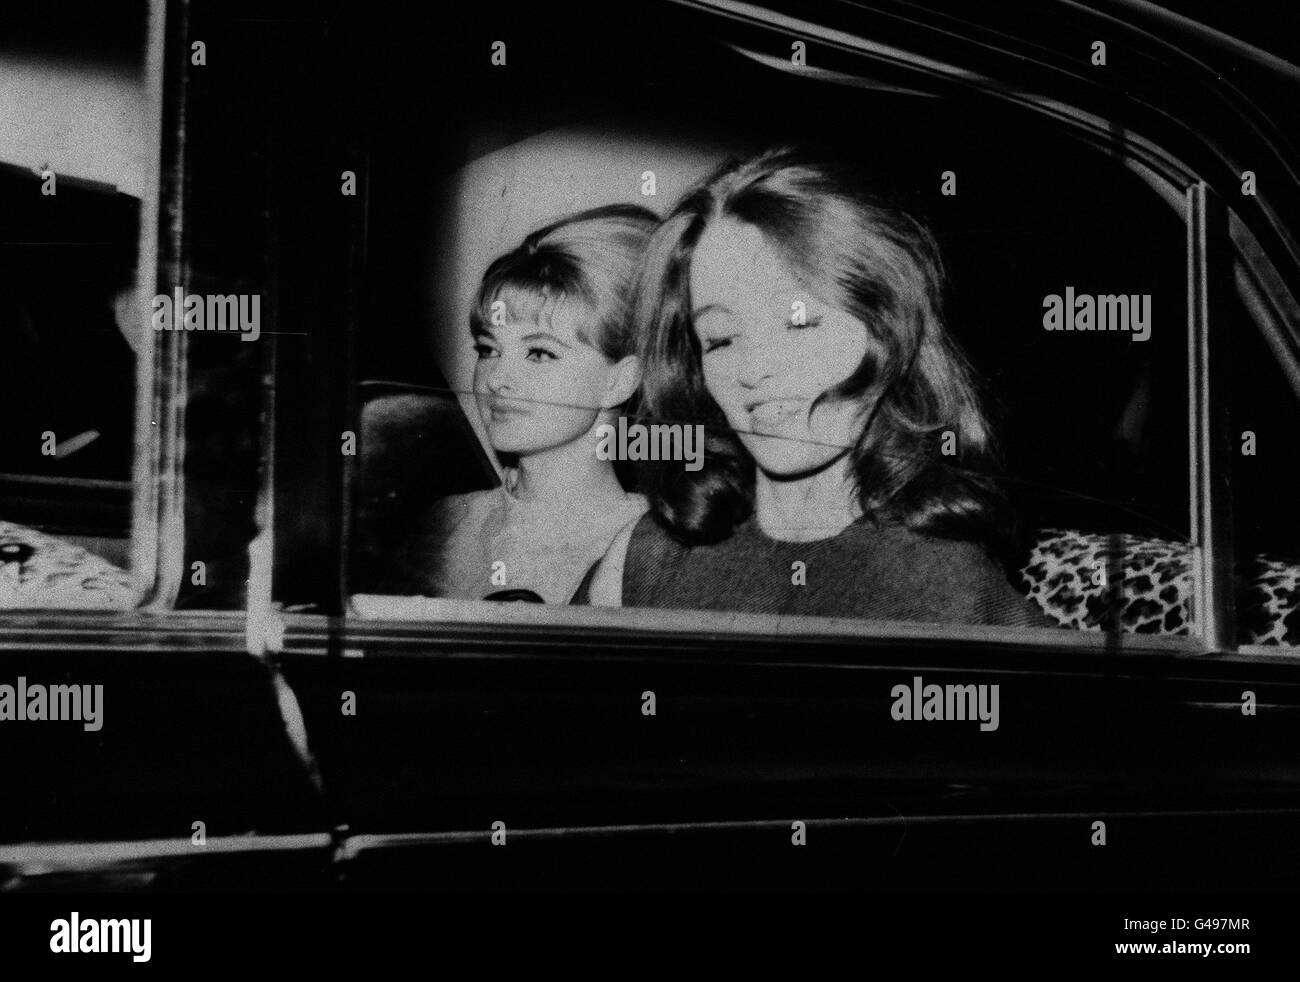 PA NEWS PHOTO 22/7/63 CHRISTINE KEELER AND MARILYN RICE-DAVIES DRIVING AWAY FROM THE OLD BAILEY, LONDON AFTER THE FIRST DAY'S HEARING IN WHICH DR. STEPHEN WARD THE 50 YEAR OLD OSTEOPATH FACES VICE CHARGES. DURING THE HEARING MR. MERVYN GRIFFITH JONES, PROSECUTING GAVE AN UNDERTAKING THAT NO ACTION WOULD BE TAKEN AGAINST HER Stock Photo